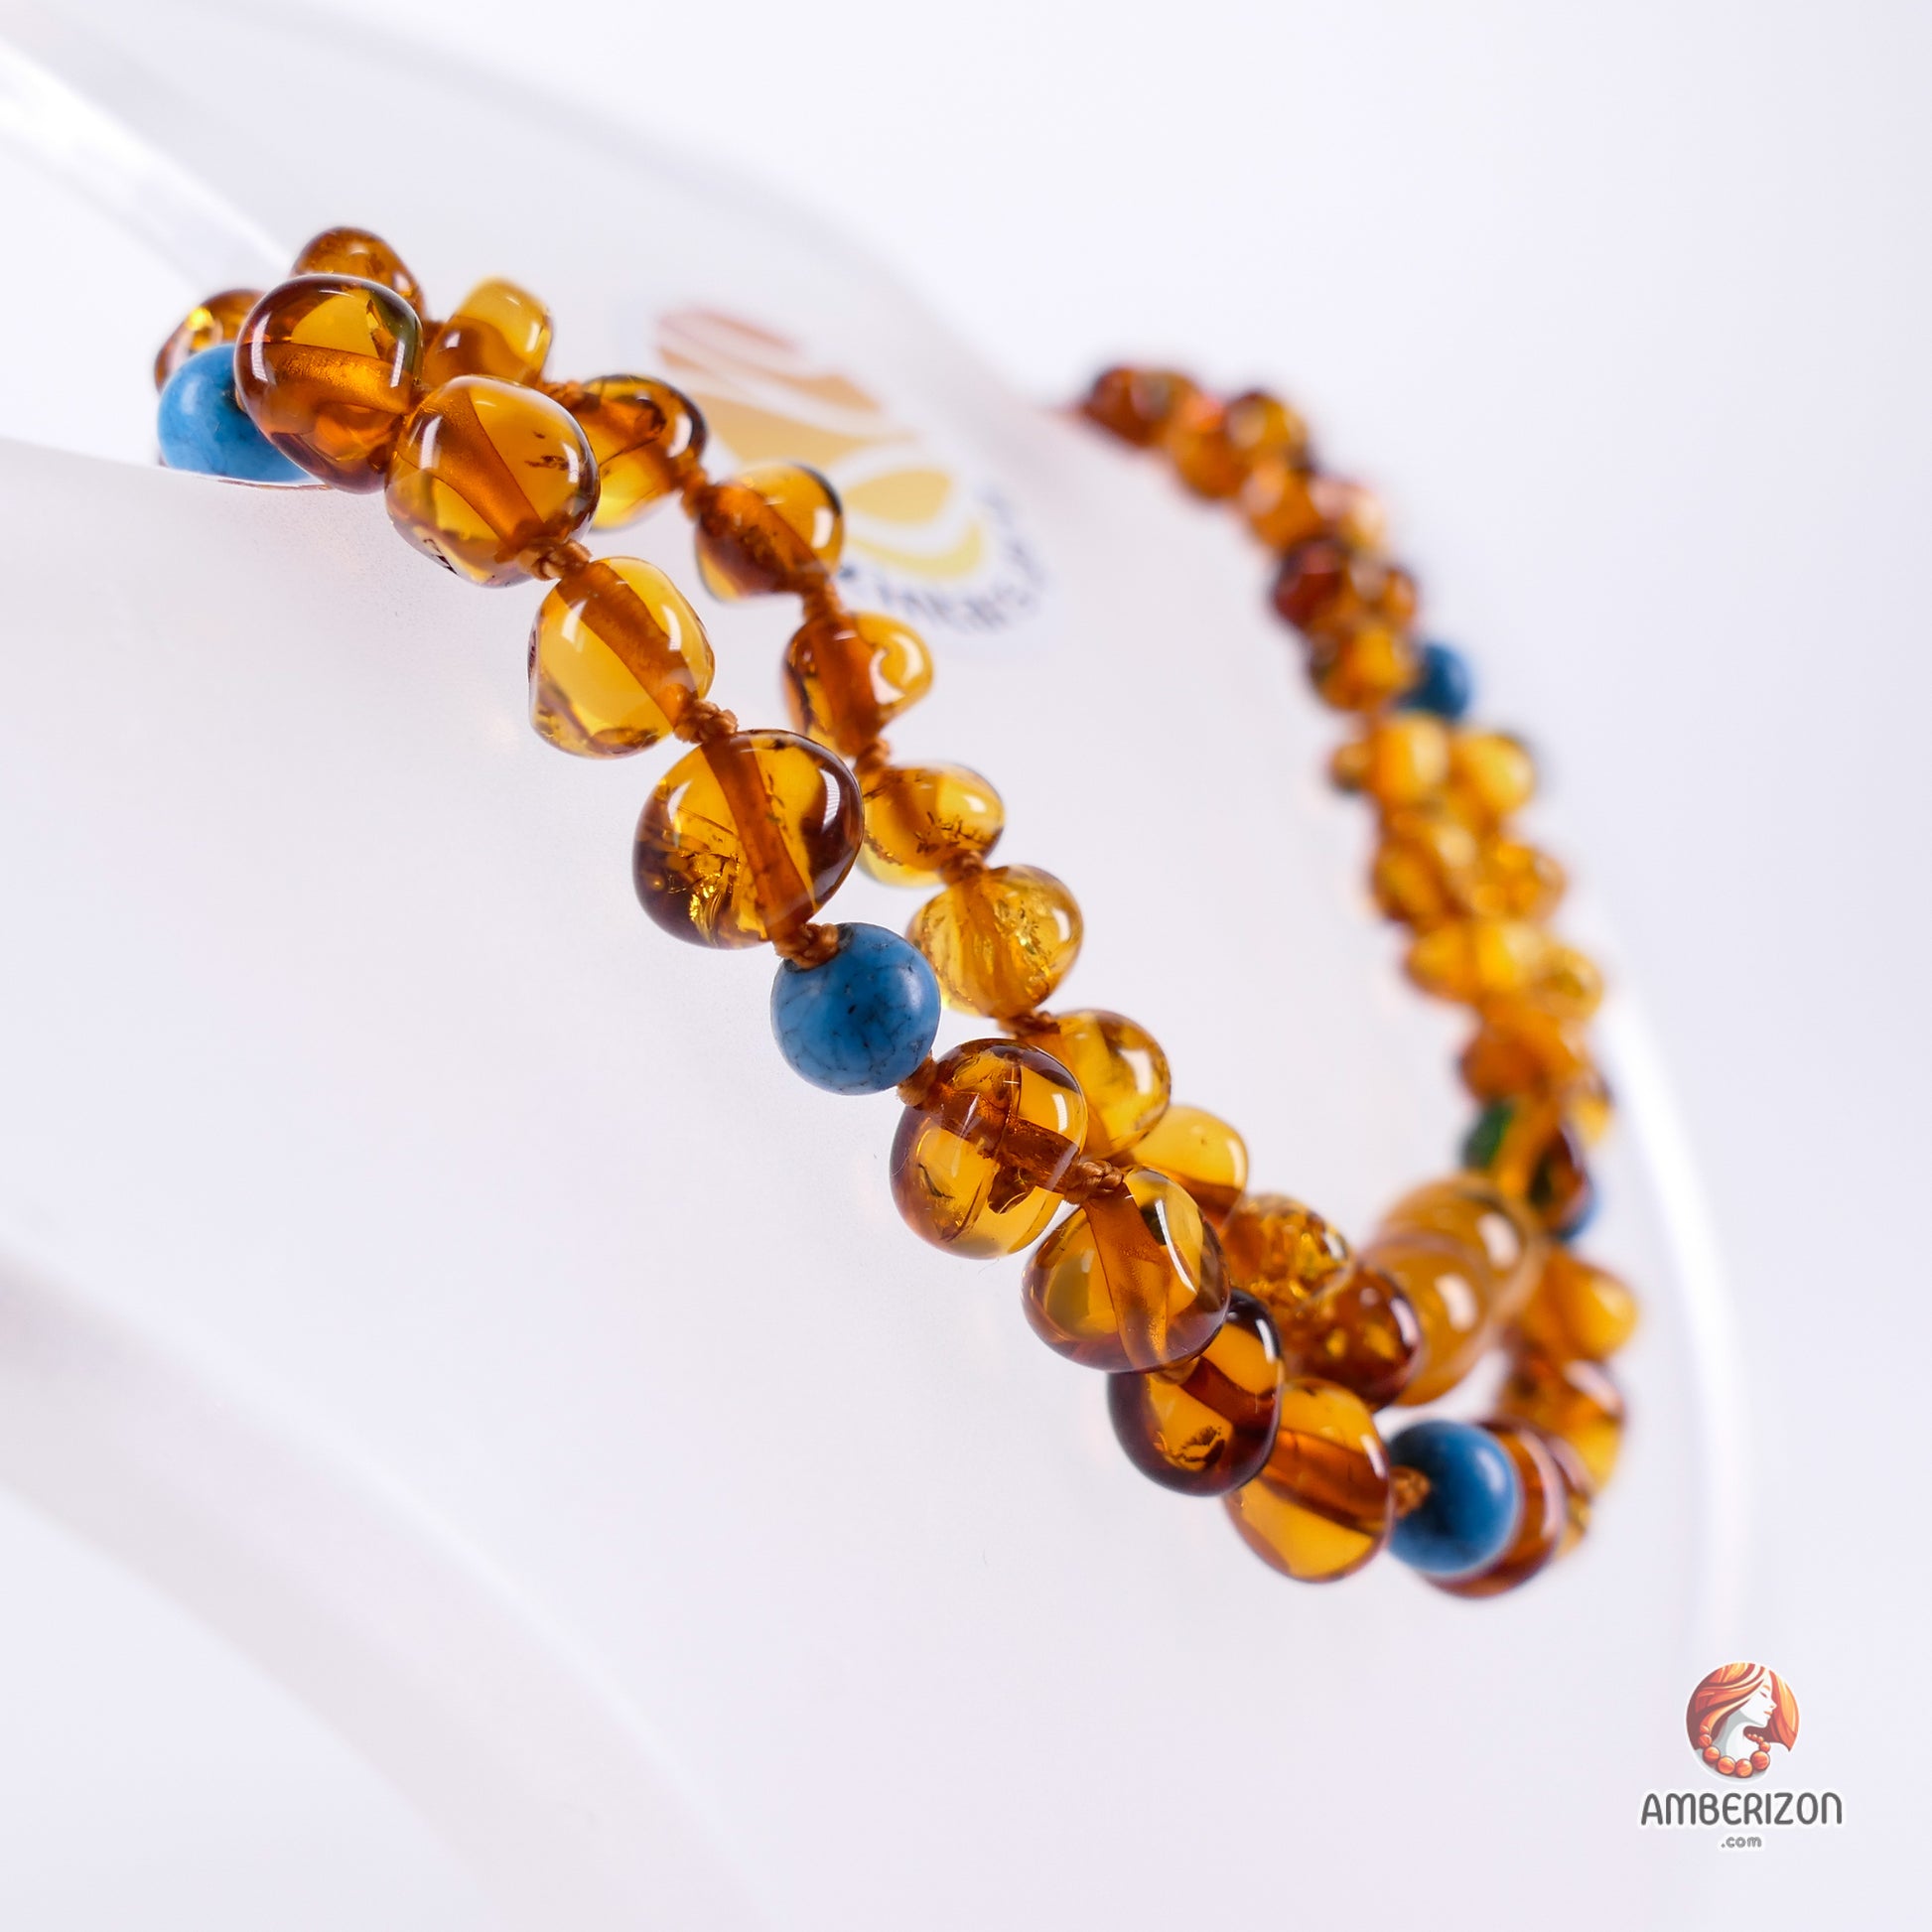 Contemporary Women's Baltic Amber Necklace - Polished Glossy Finish